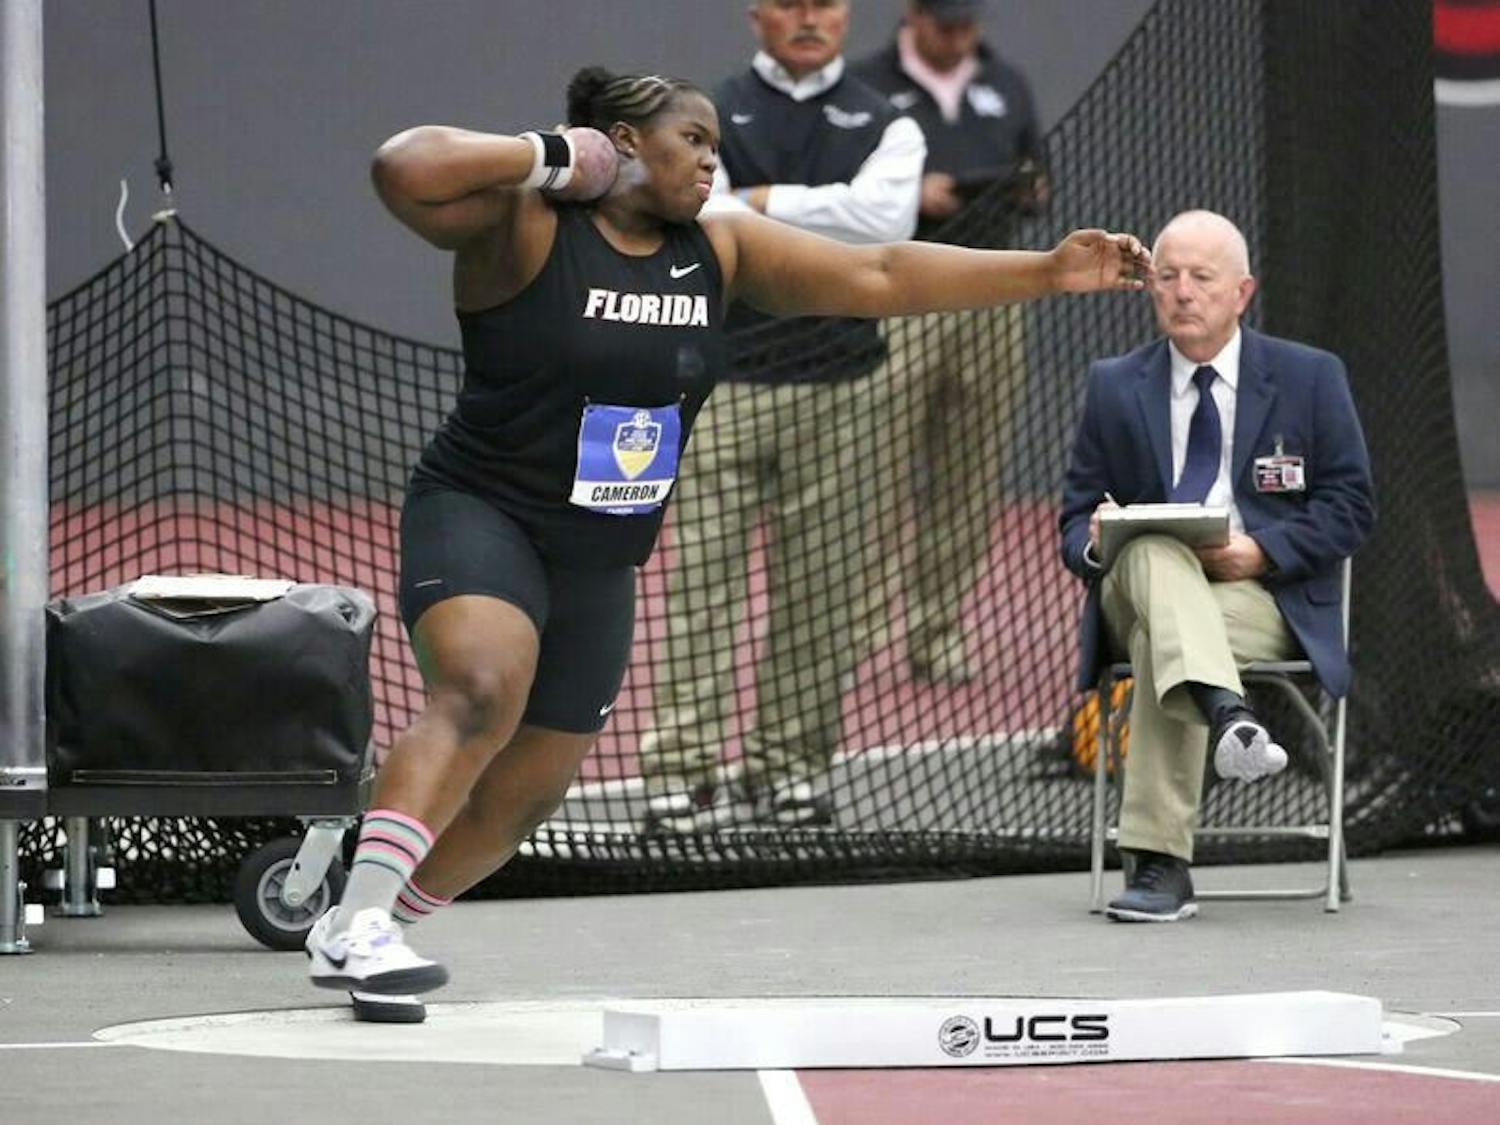 UF thrower Lloydricia Cameron throws the shot put during the&nbsp;2016 SEC Indoor Track and Field Championships.&nbsp;
&nbsp;